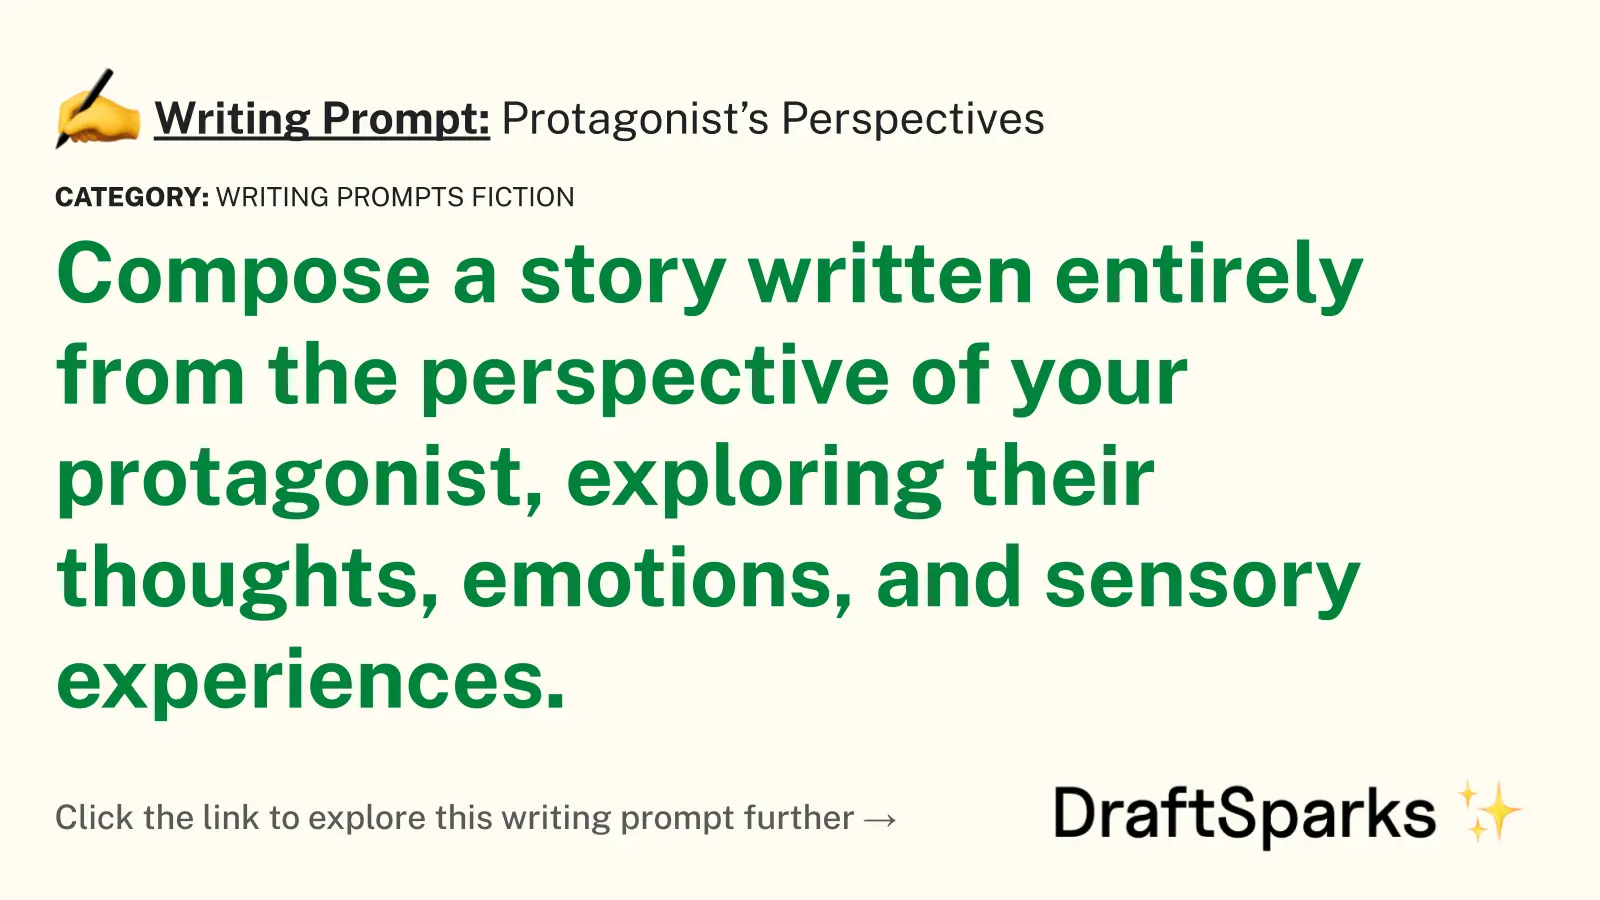 Protagonist’s Perspectives